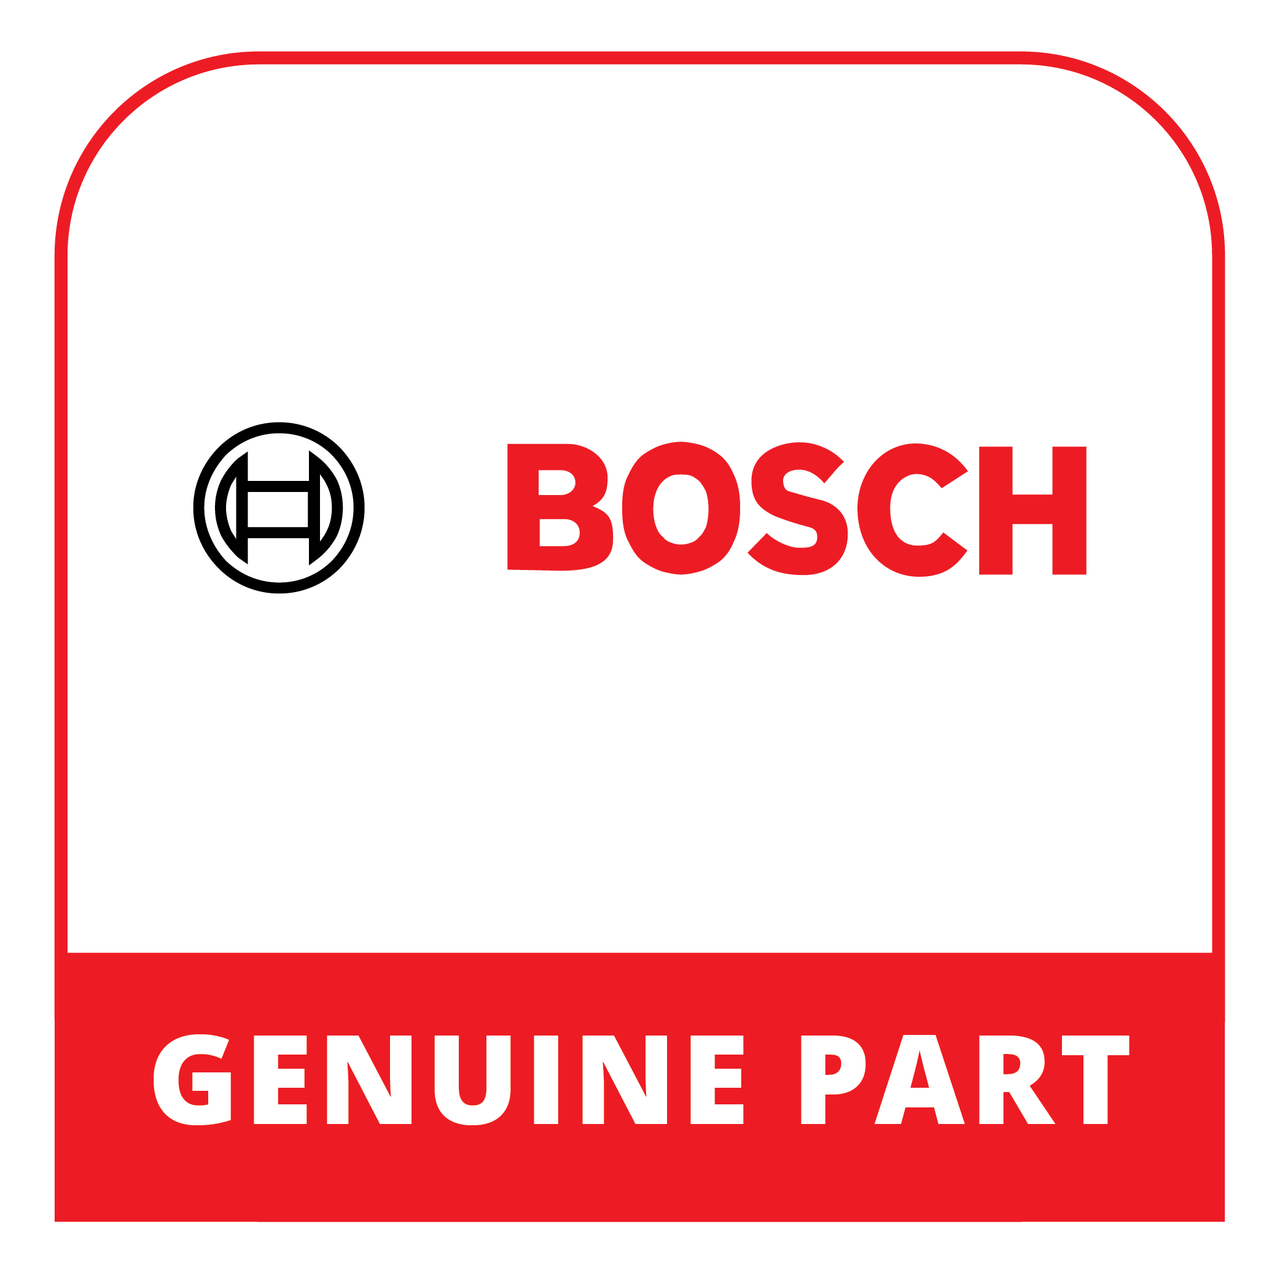 Bosch (Thermador) 12036176 - Filter Holder - Genuine Bosch (Thermador) Part